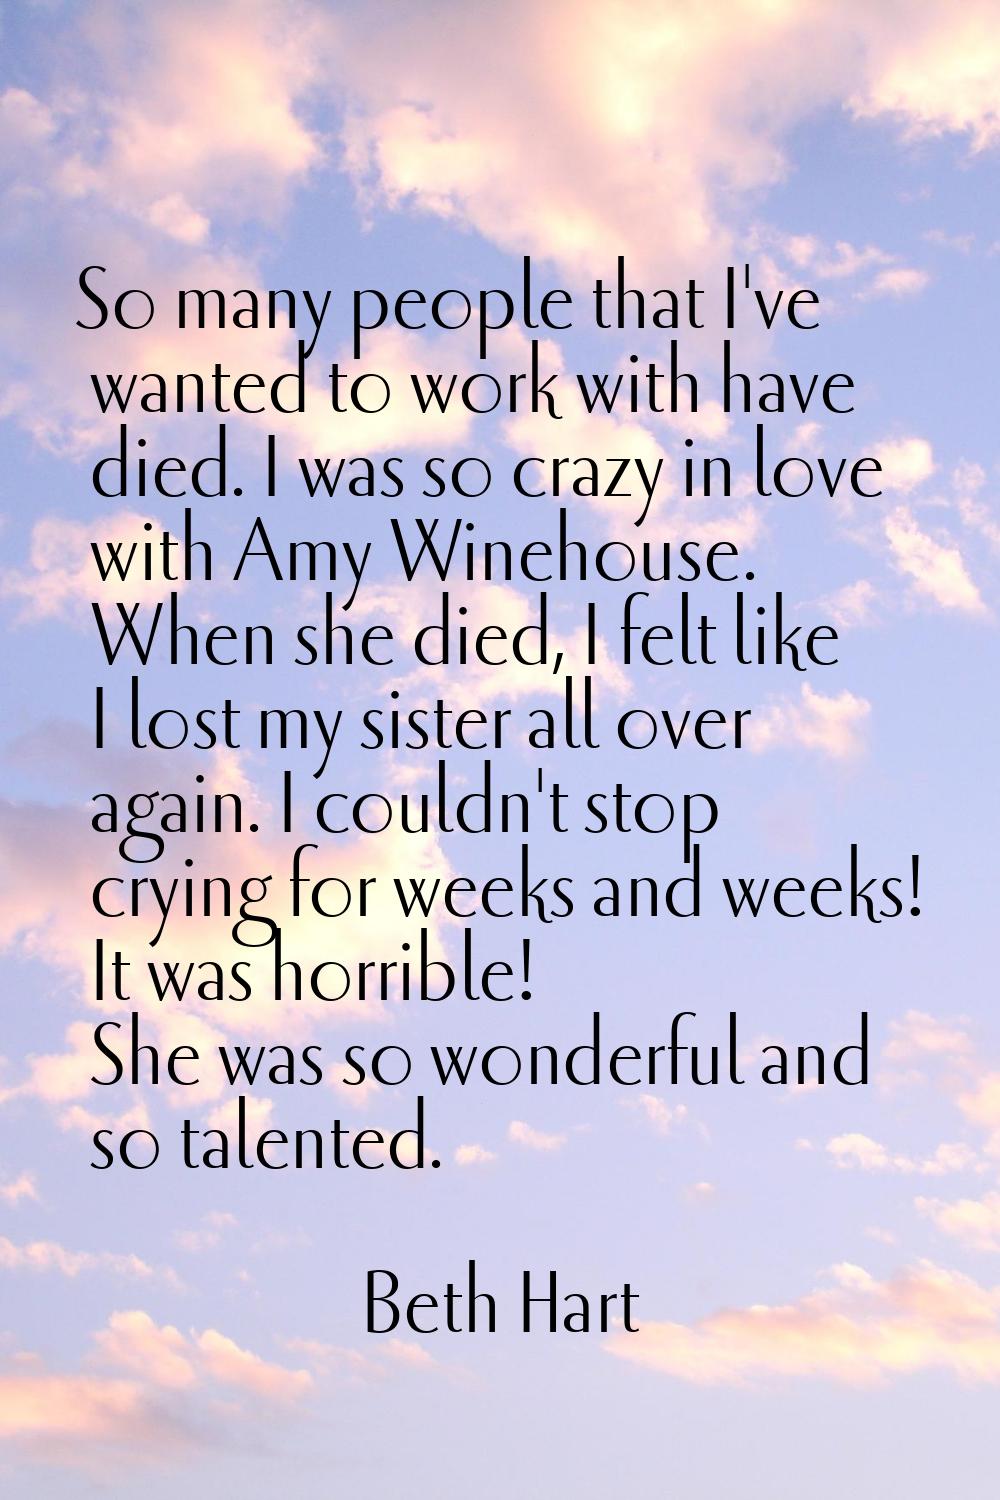 So many people that I've wanted to work with have died. I was so crazy in love with Amy Winehouse. 